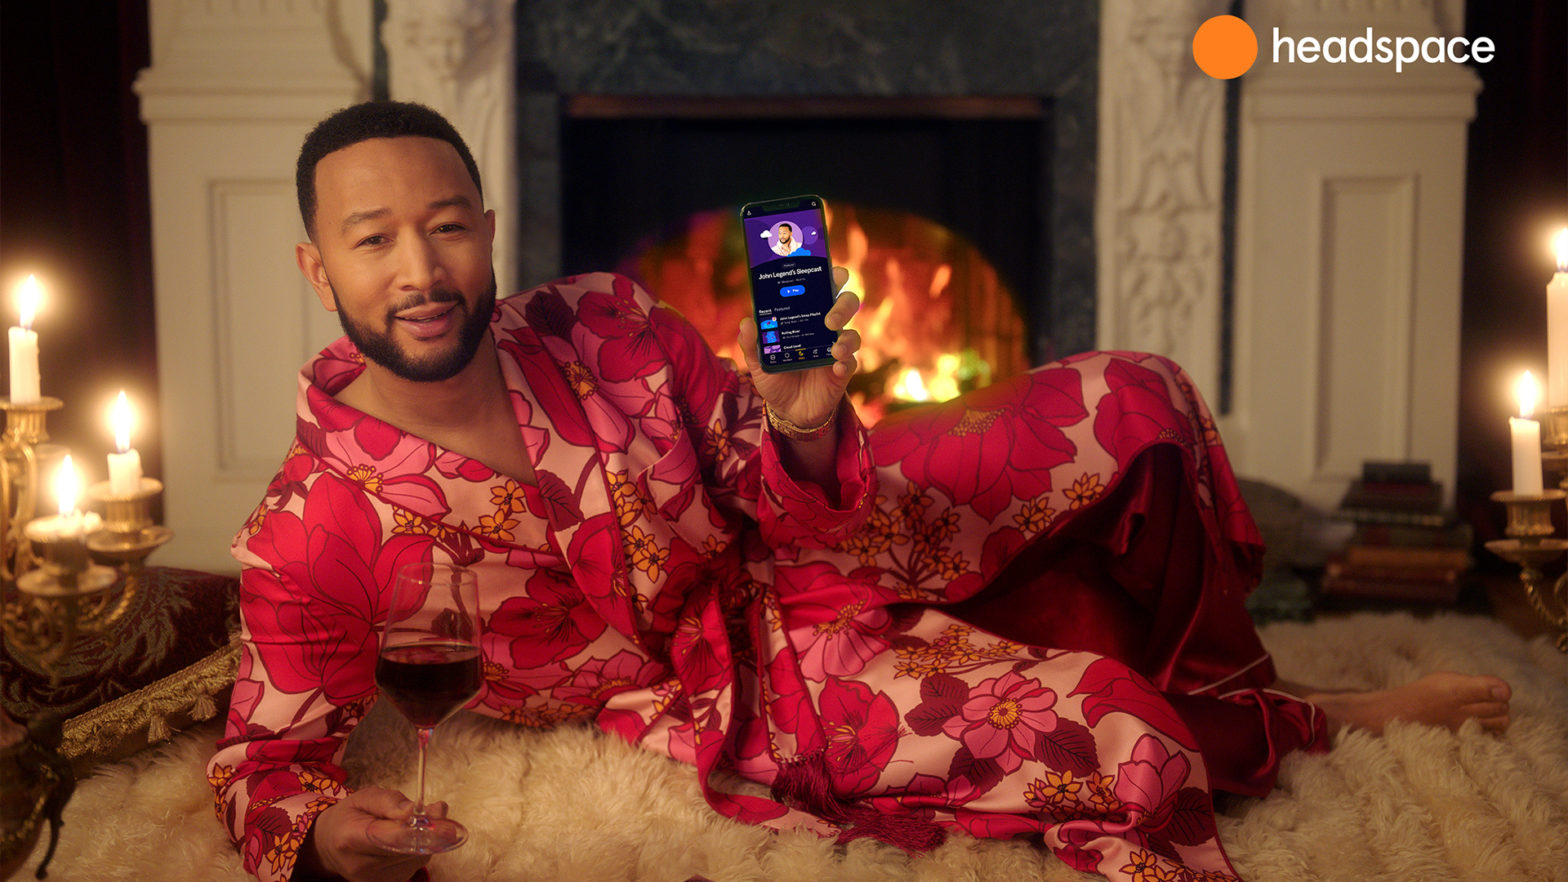 John Legend And The Headspace App Introduce New Tools To Get You In Bed